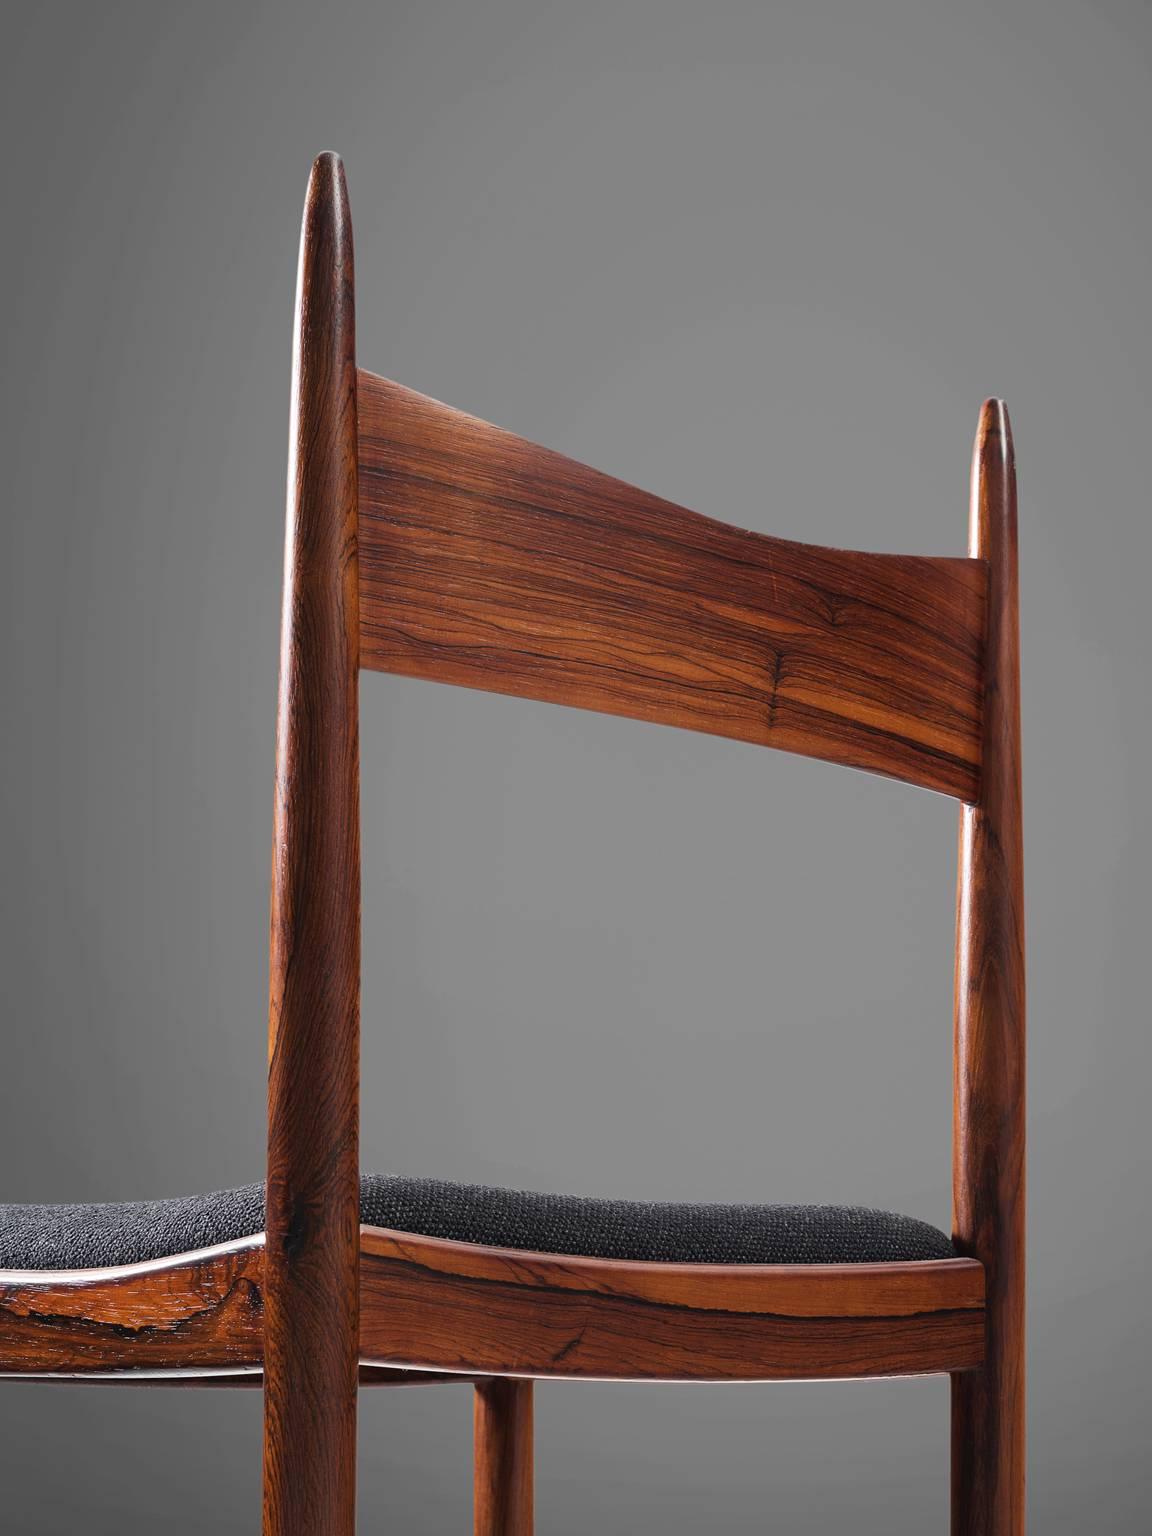 Mid-20th Century Solid Rosewood Dining Chairs, Denmark, circa 1950